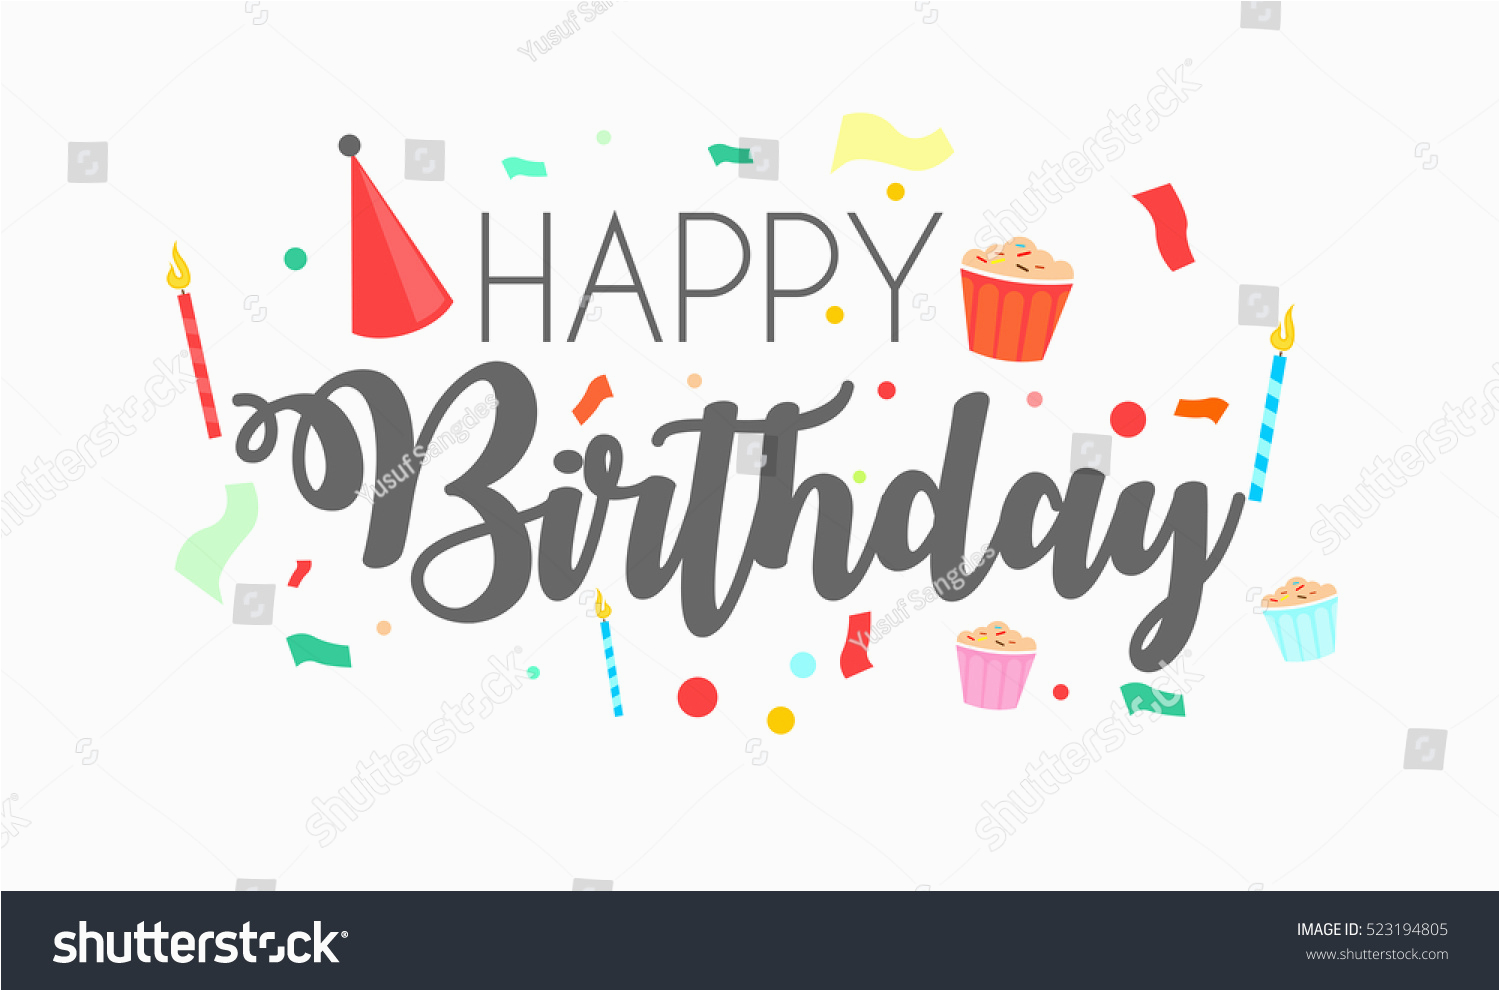 Free Birthday Cards for Texting Happy Birthday Typographic Vector Design Greeting Stock